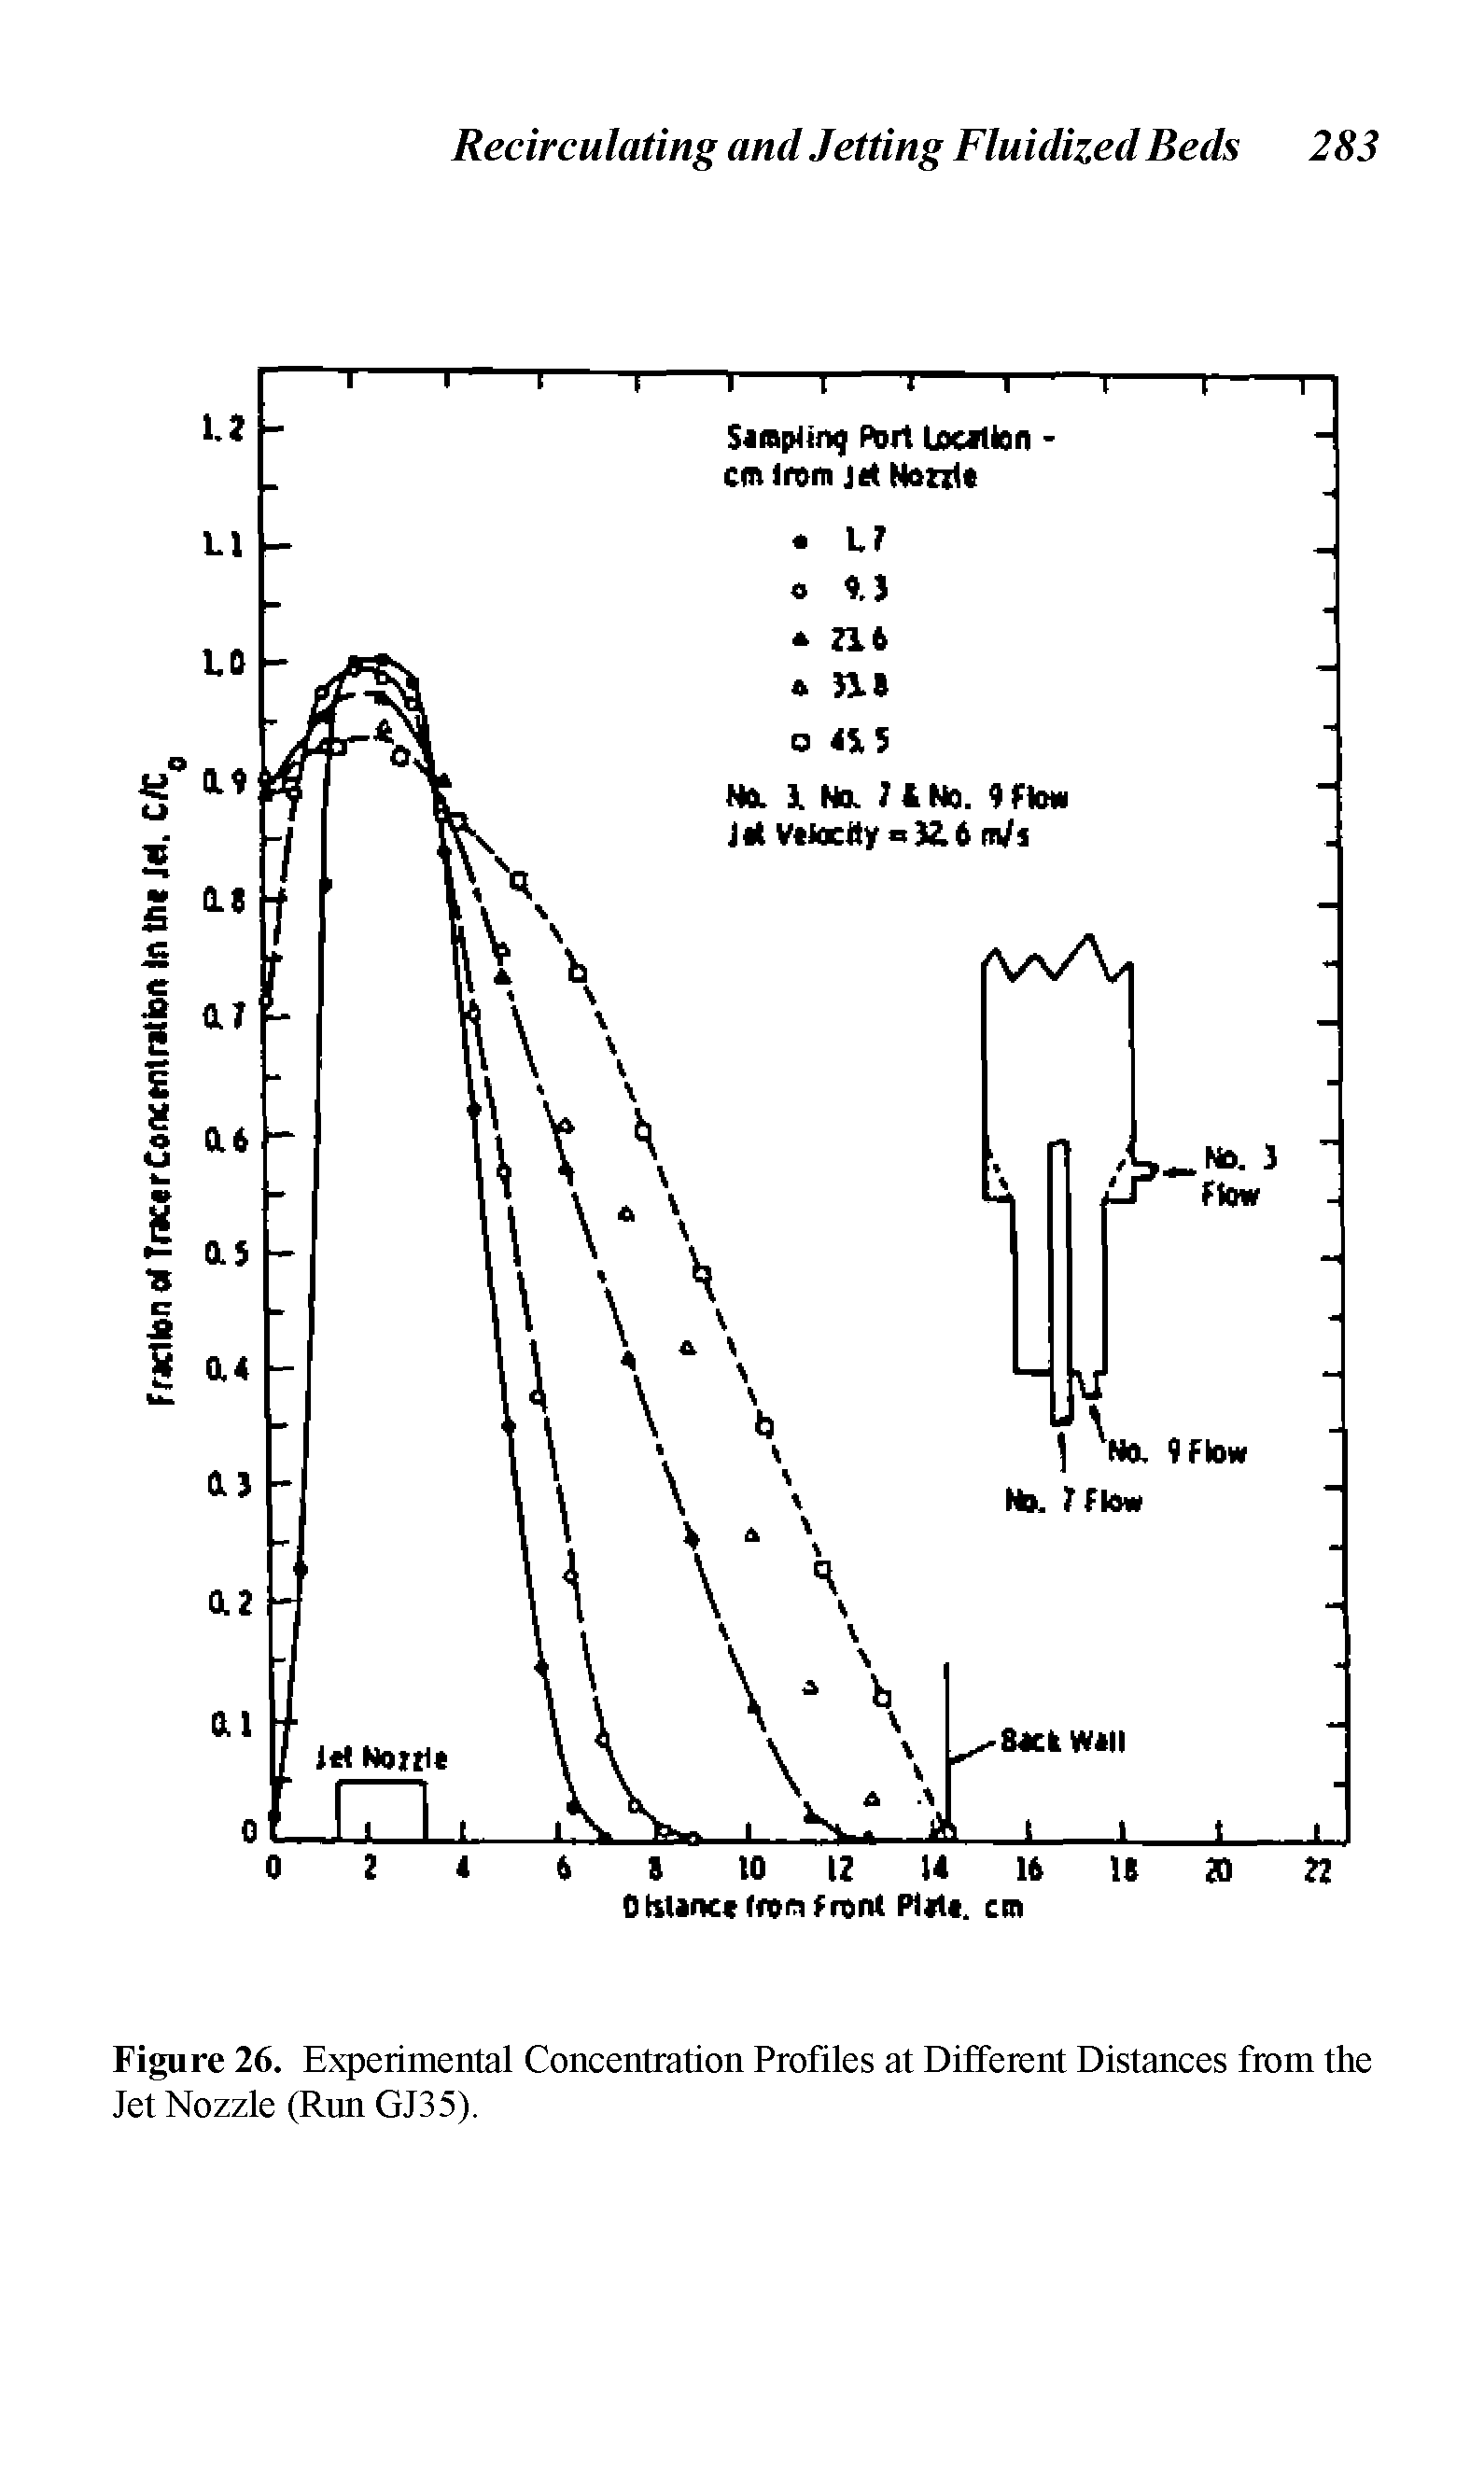 Figure 26. Experimental Concentration Profiles at Different Distances from the Jet Nozzle (Run GJ35).